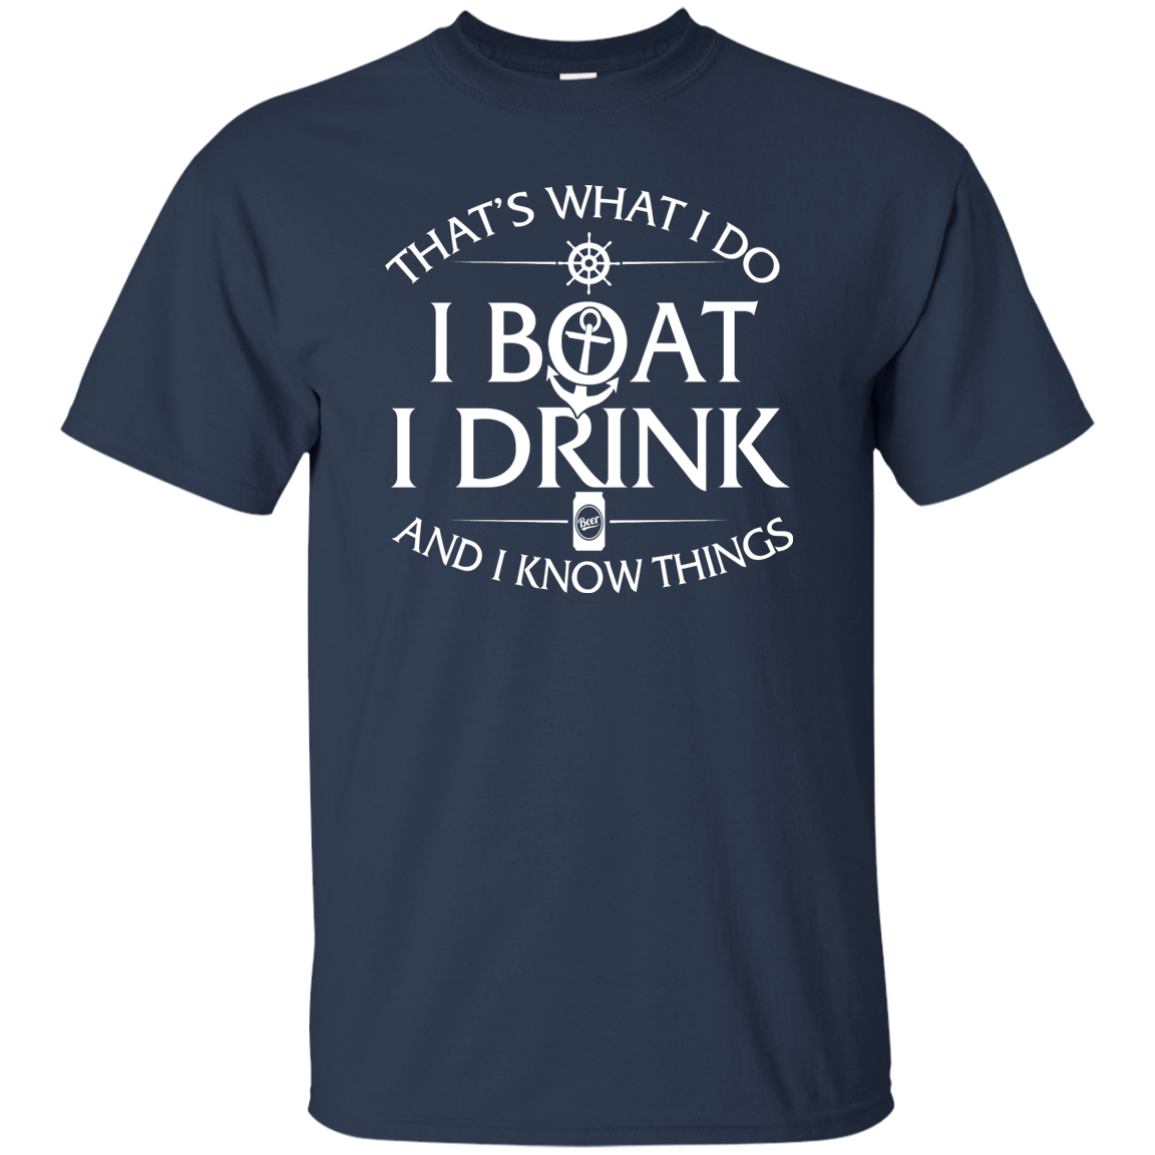 I Boat, I Drink and I Know Things - Shirts/Hoodies/Tank Top